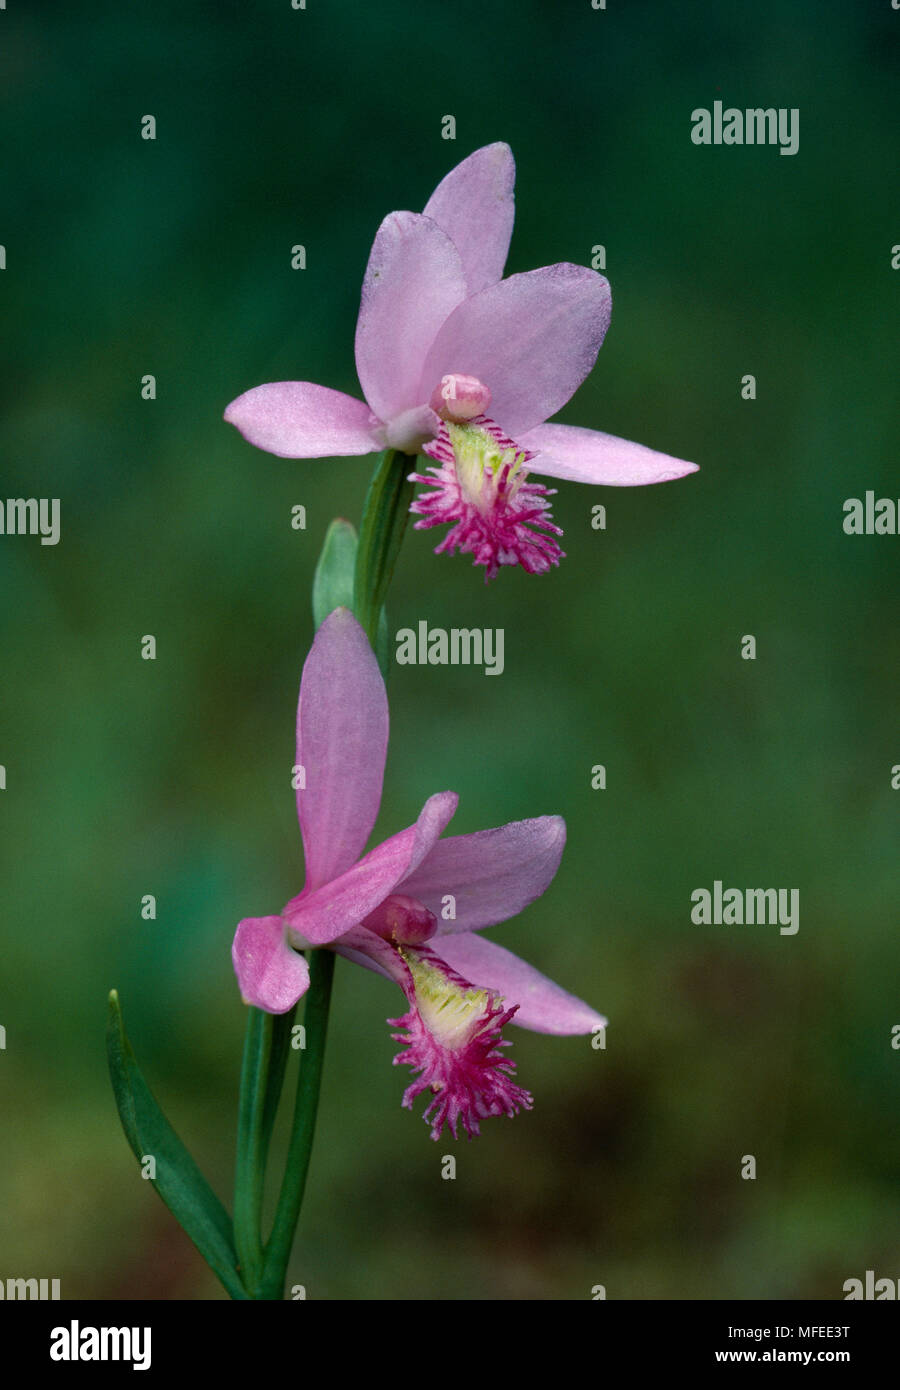 ROSE POGONIA ORCHID  flowers  Pogonia ophioglossoides in tamarack bog  Michigan, USA Stock Photo